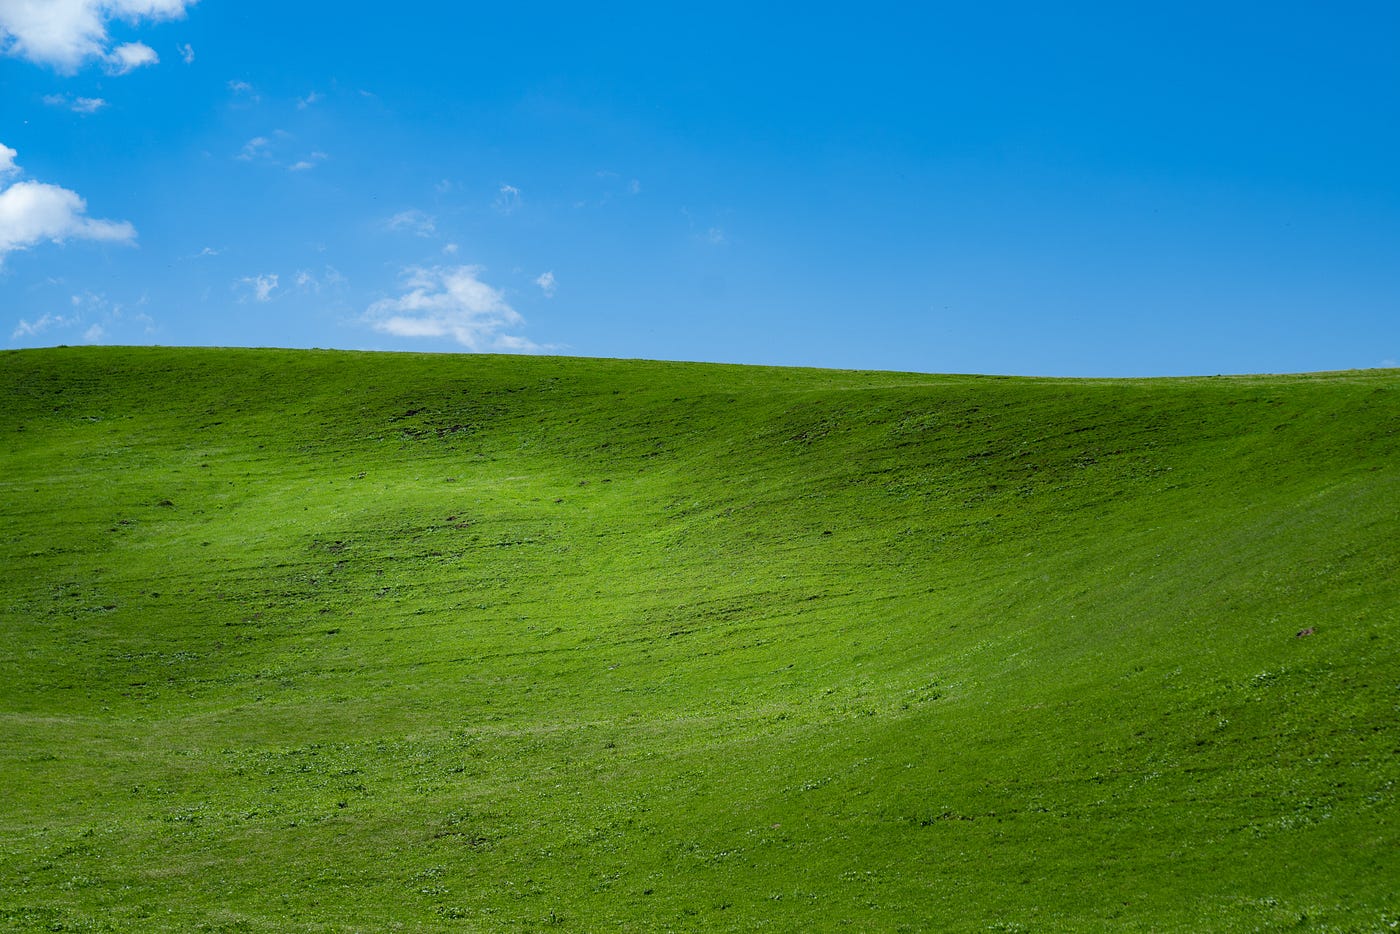 Why Is Windows XP So Fondly Remembered?, by Mike Grindle, ILLUMINATION